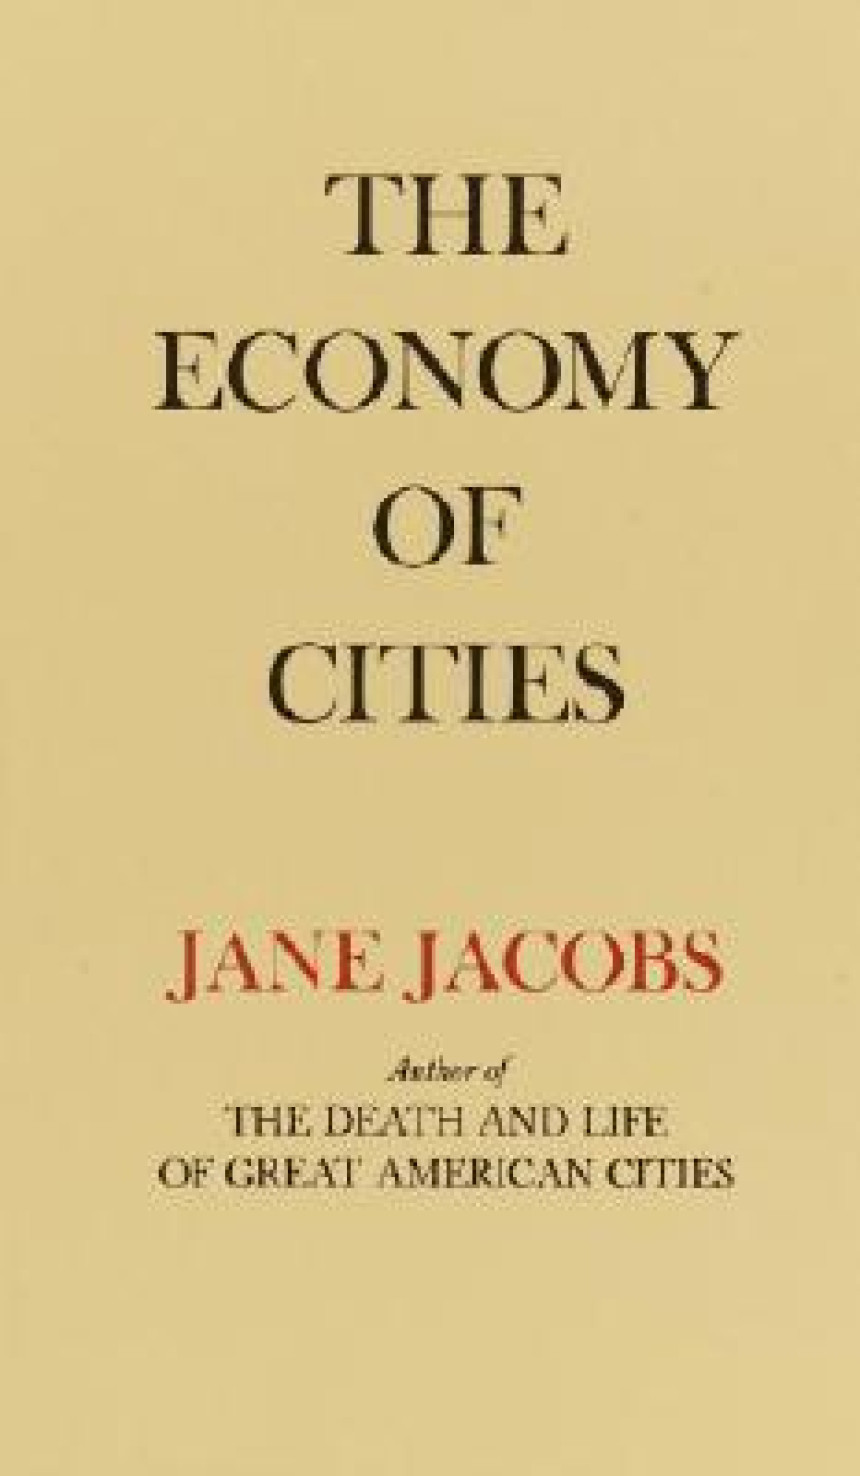 Free Download The Economy of Cities by Jane Jacobs